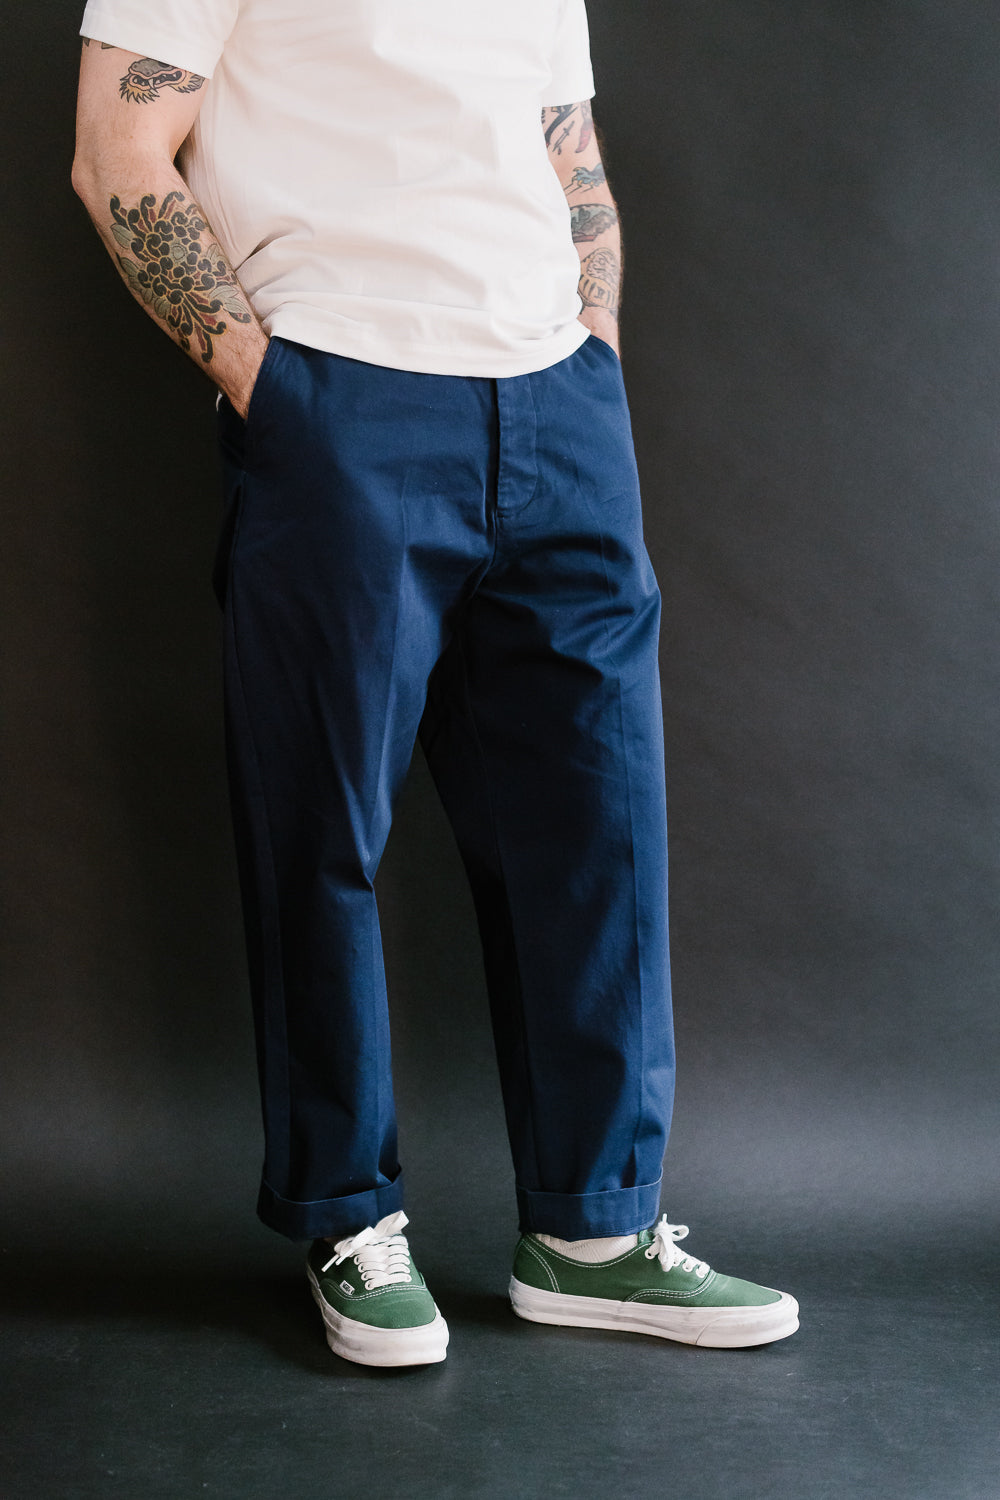 CHINO01.66 - 9.2oz Organic Cotton Twill Chino Relaxed Fit - Ink Blue